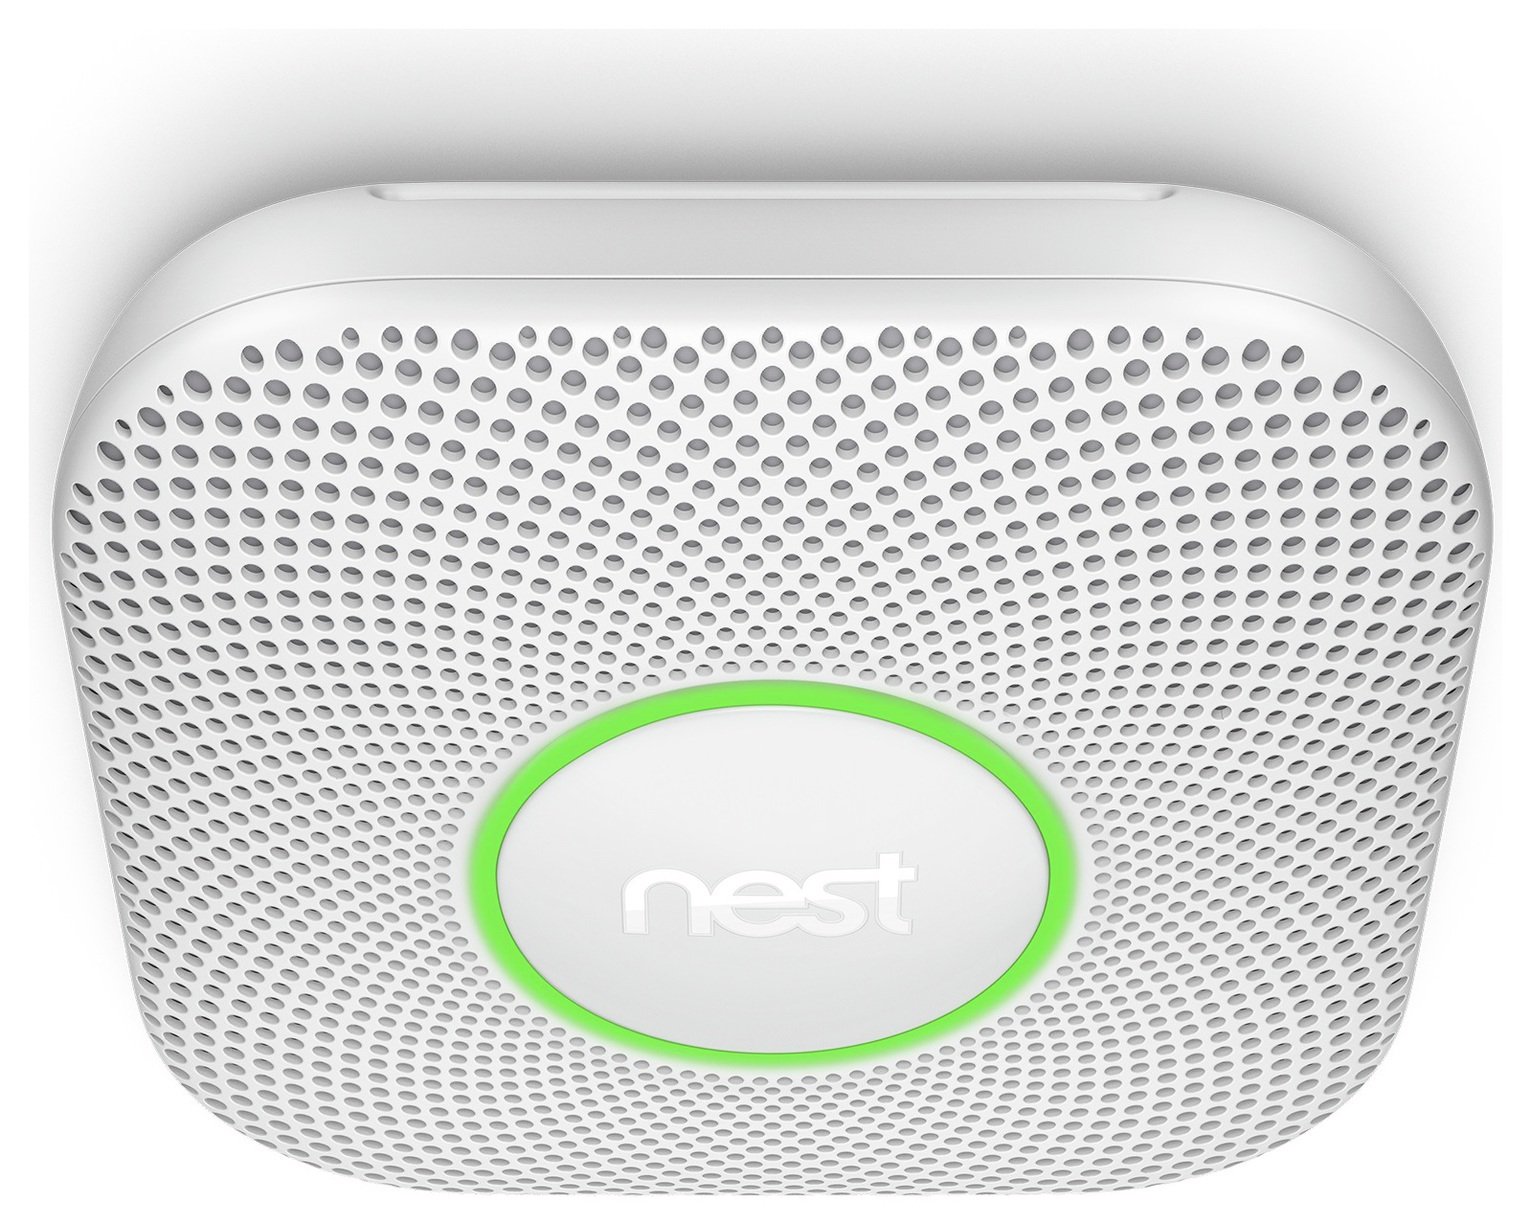 nest-protect-2nd-generation-smoke-and-co-detector-battery-reviews